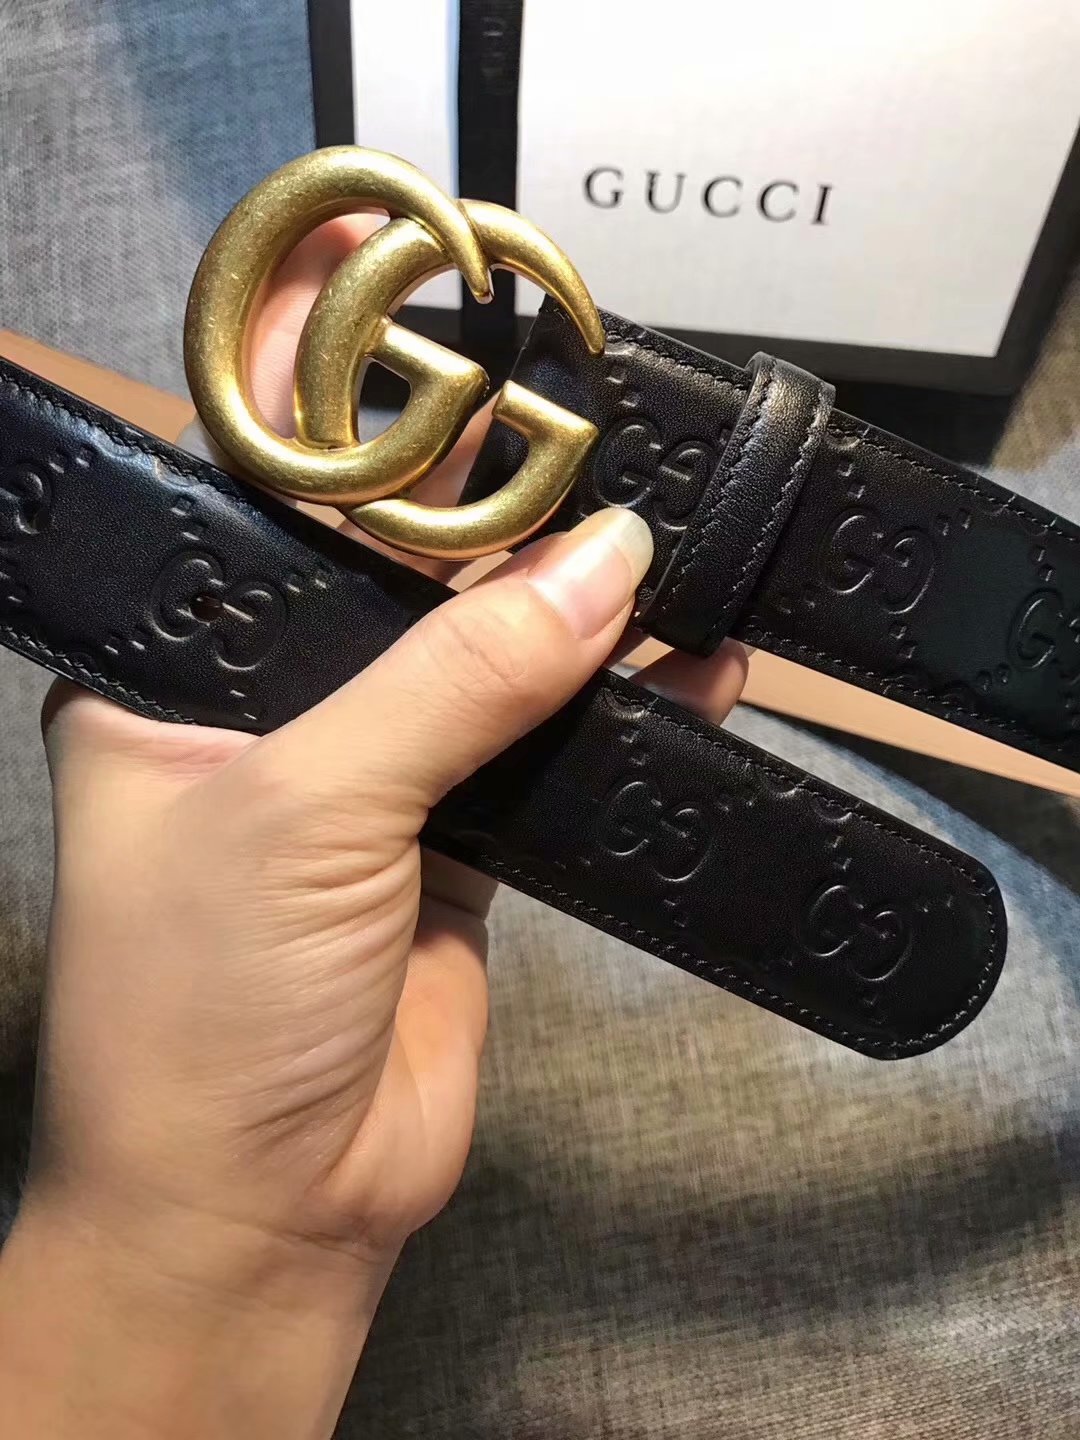 Cheap Replica Gucci Women Leather Belt Black Width 3.5cm With Gold Buckle 082